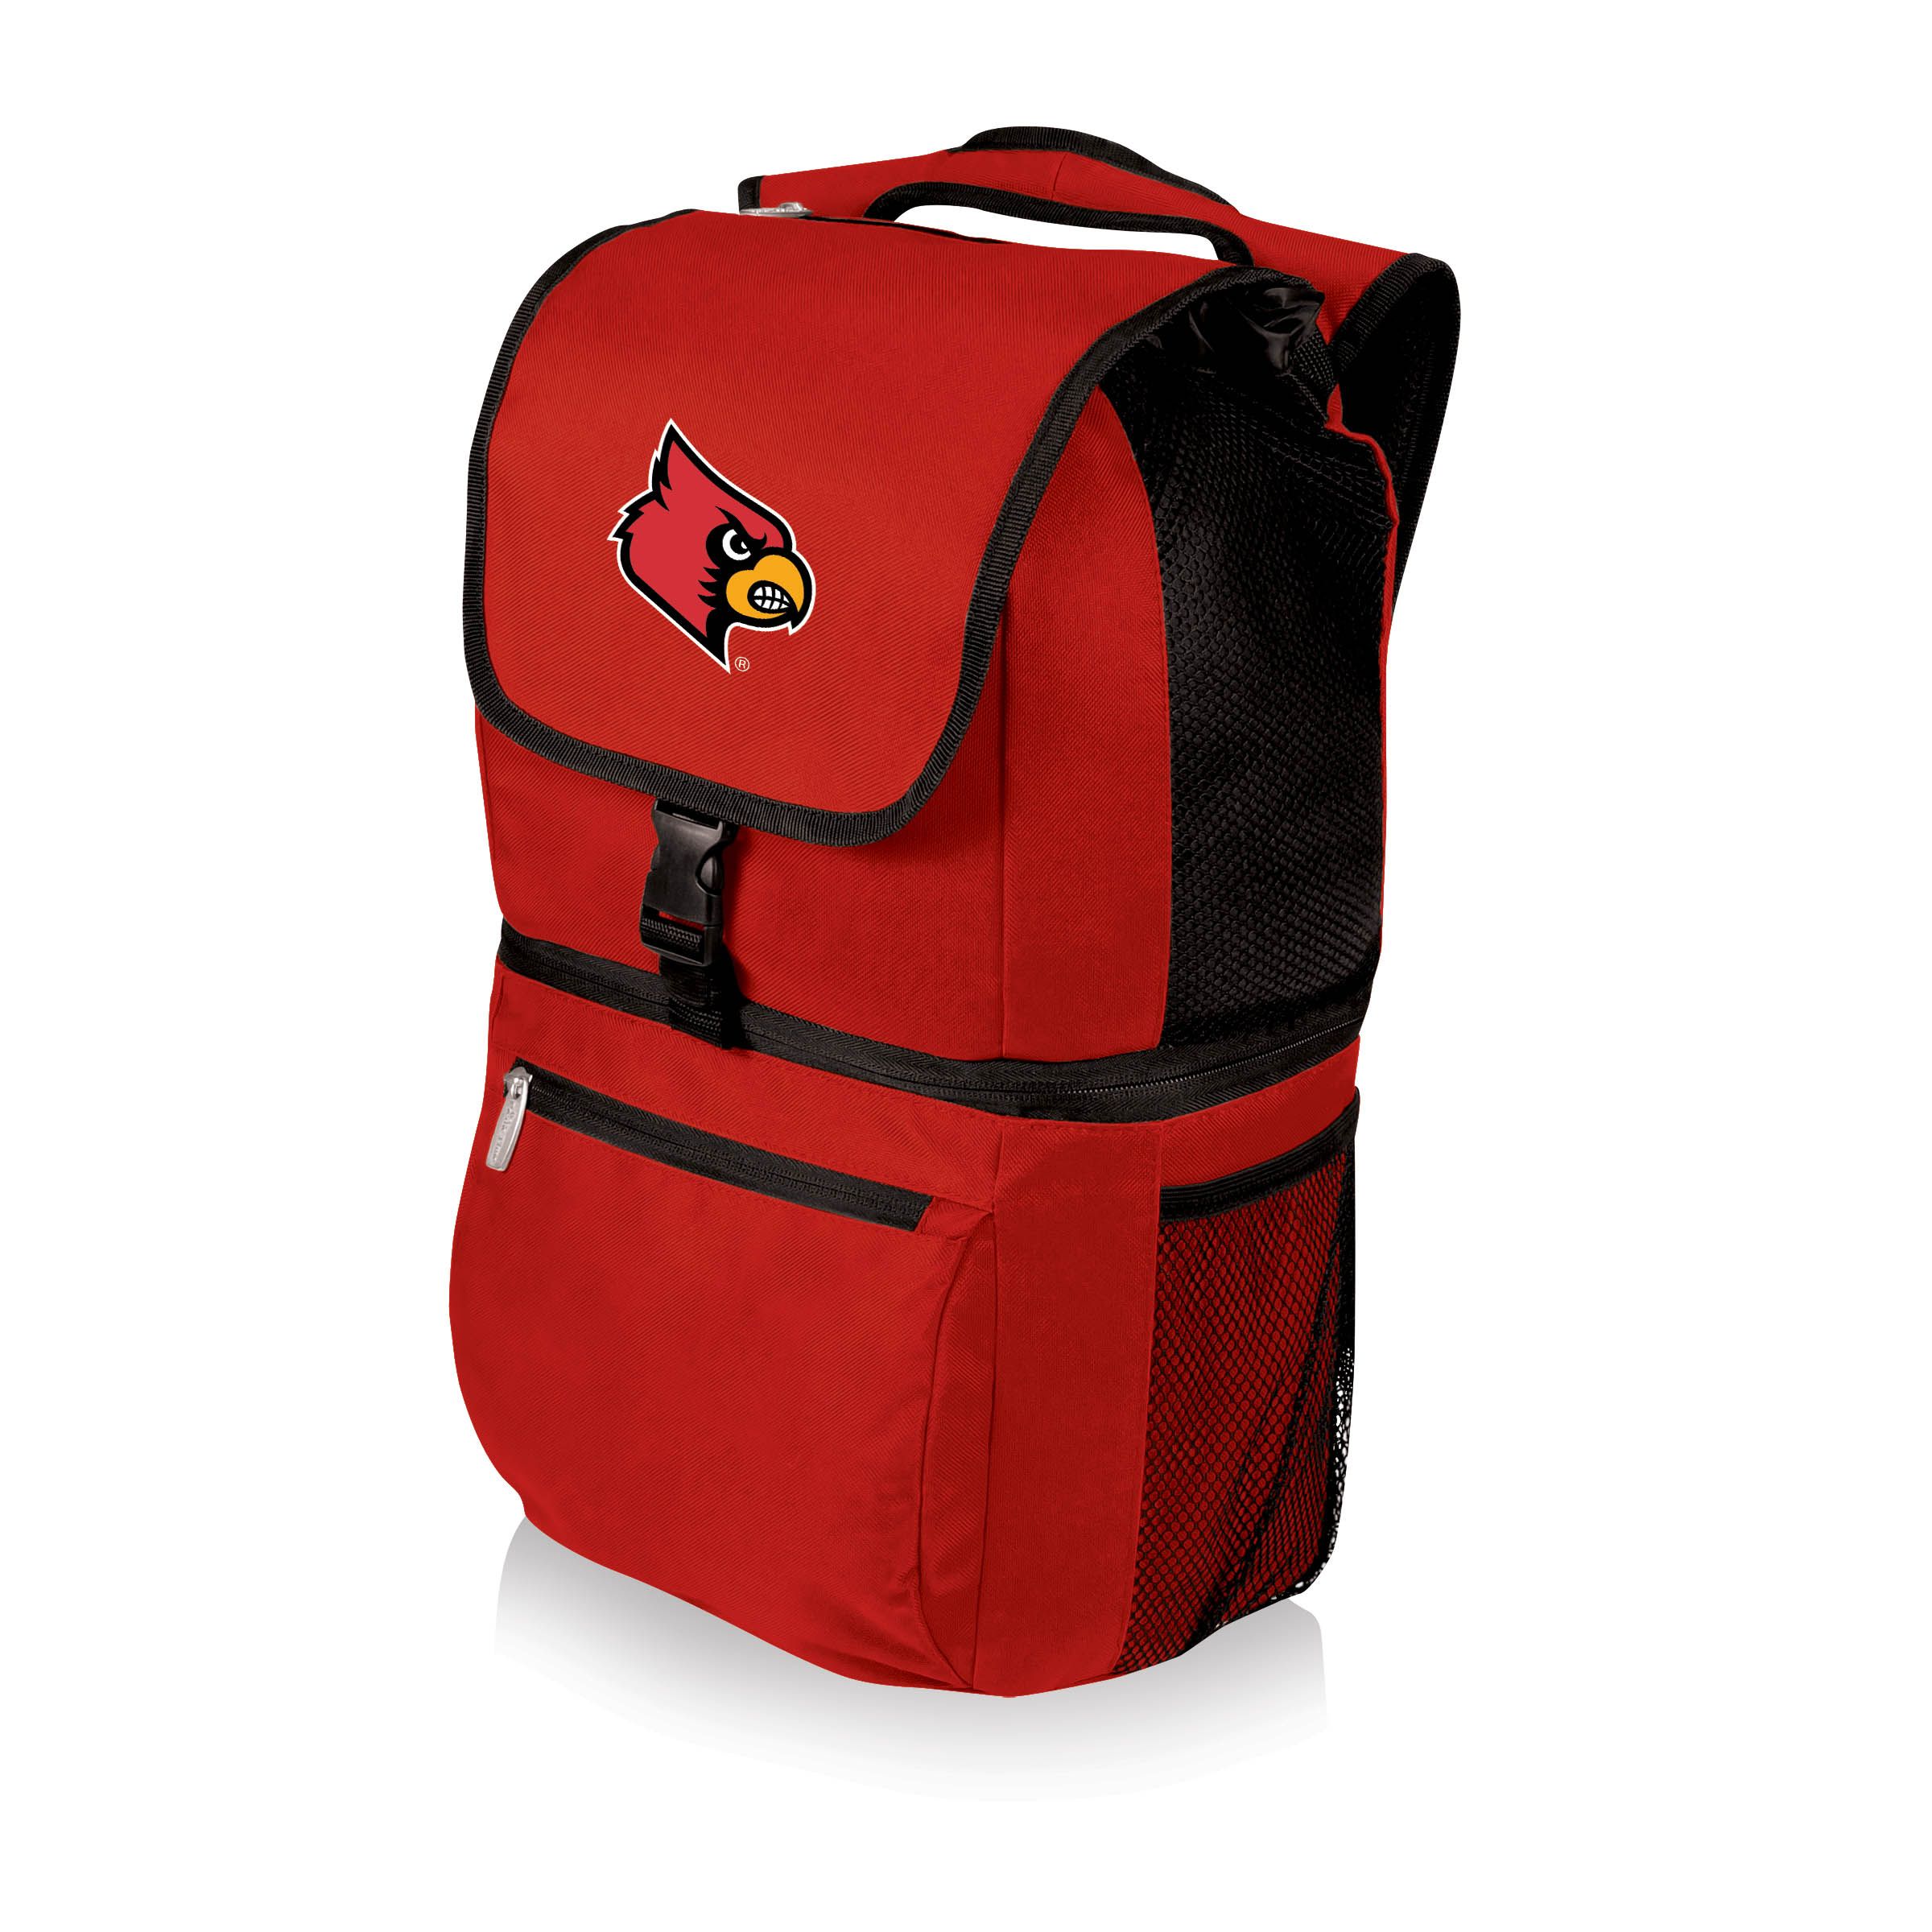 Picnic Time Louisville Cardinals Blanket Tote